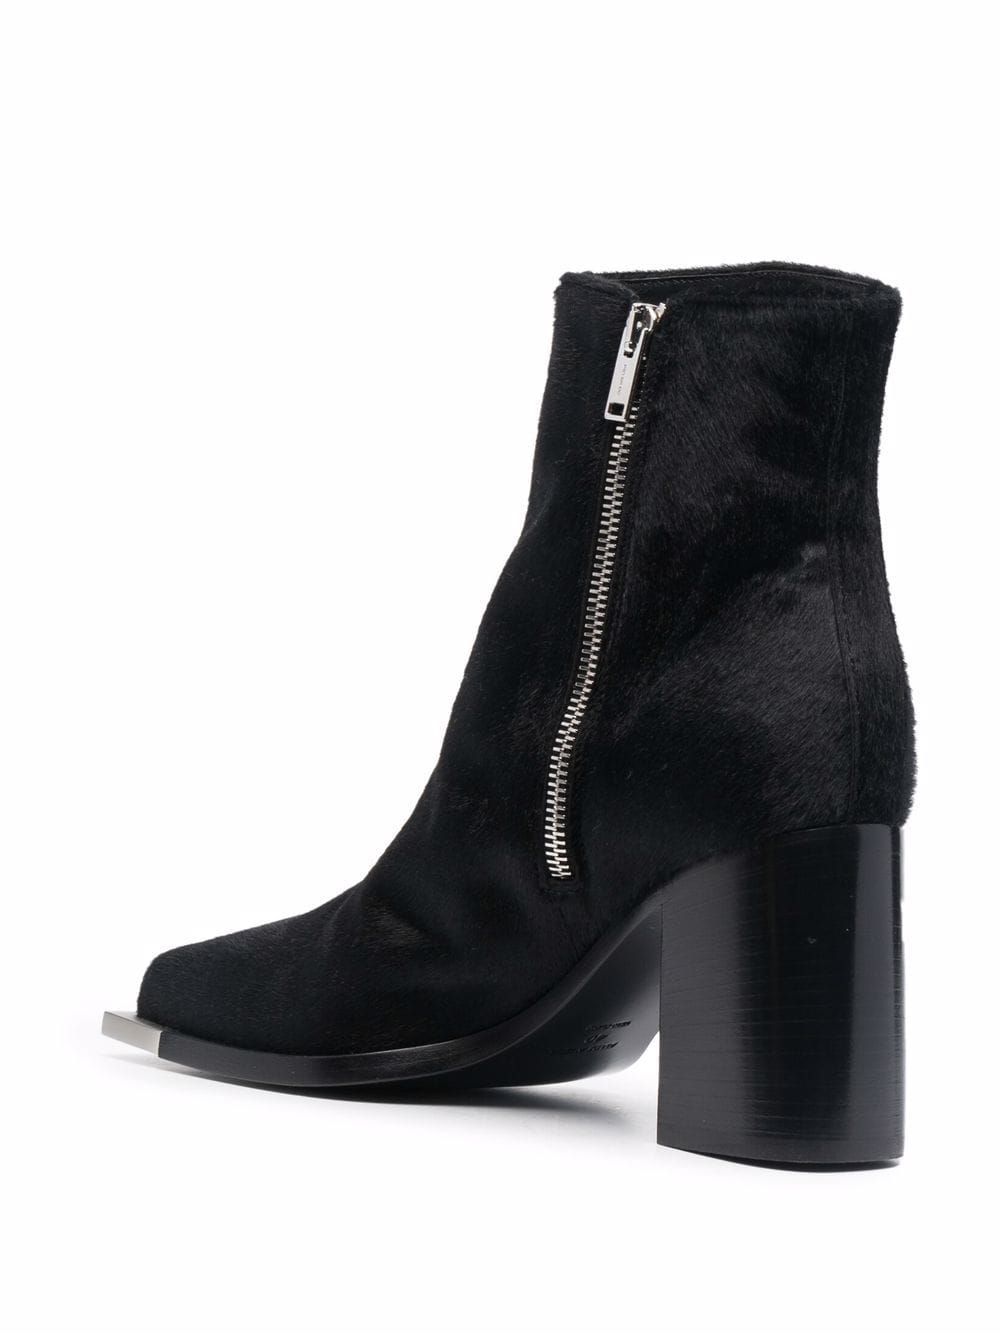 peter do everyday metal-top leather boots - black